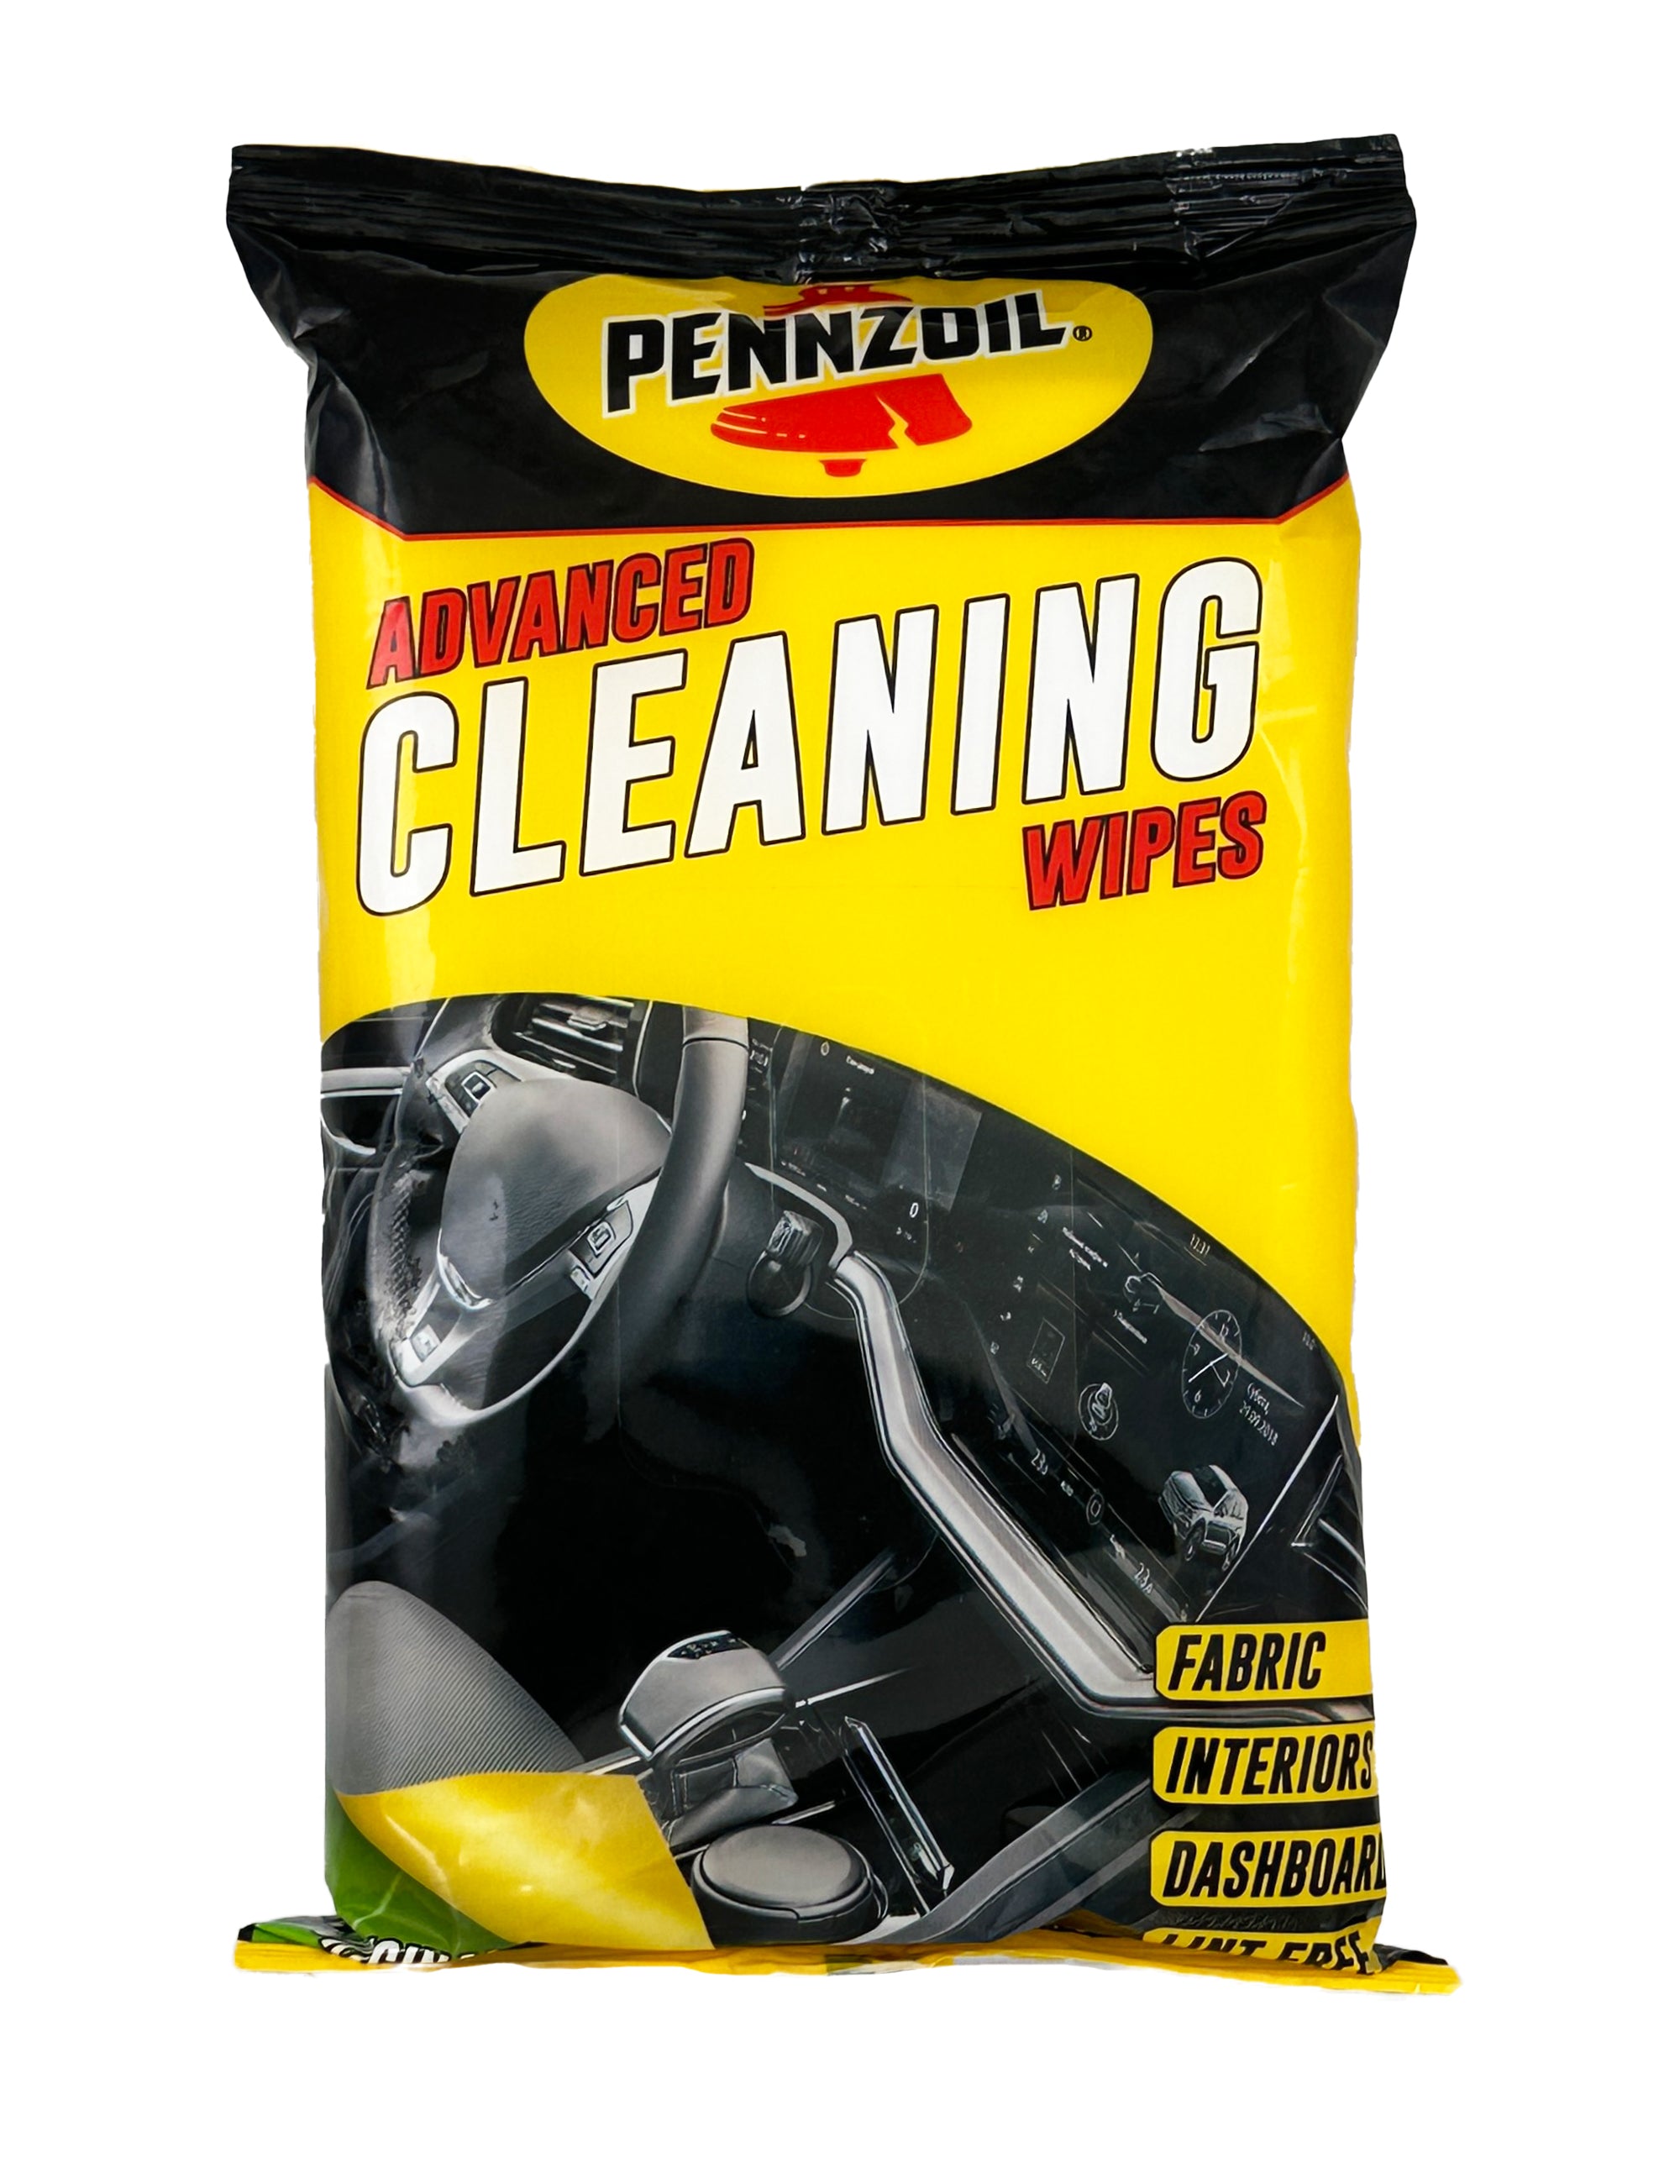 TrexNYC Cleaning Wipes - Interior Car Wipes, All-in-One Car Interior Cleaner